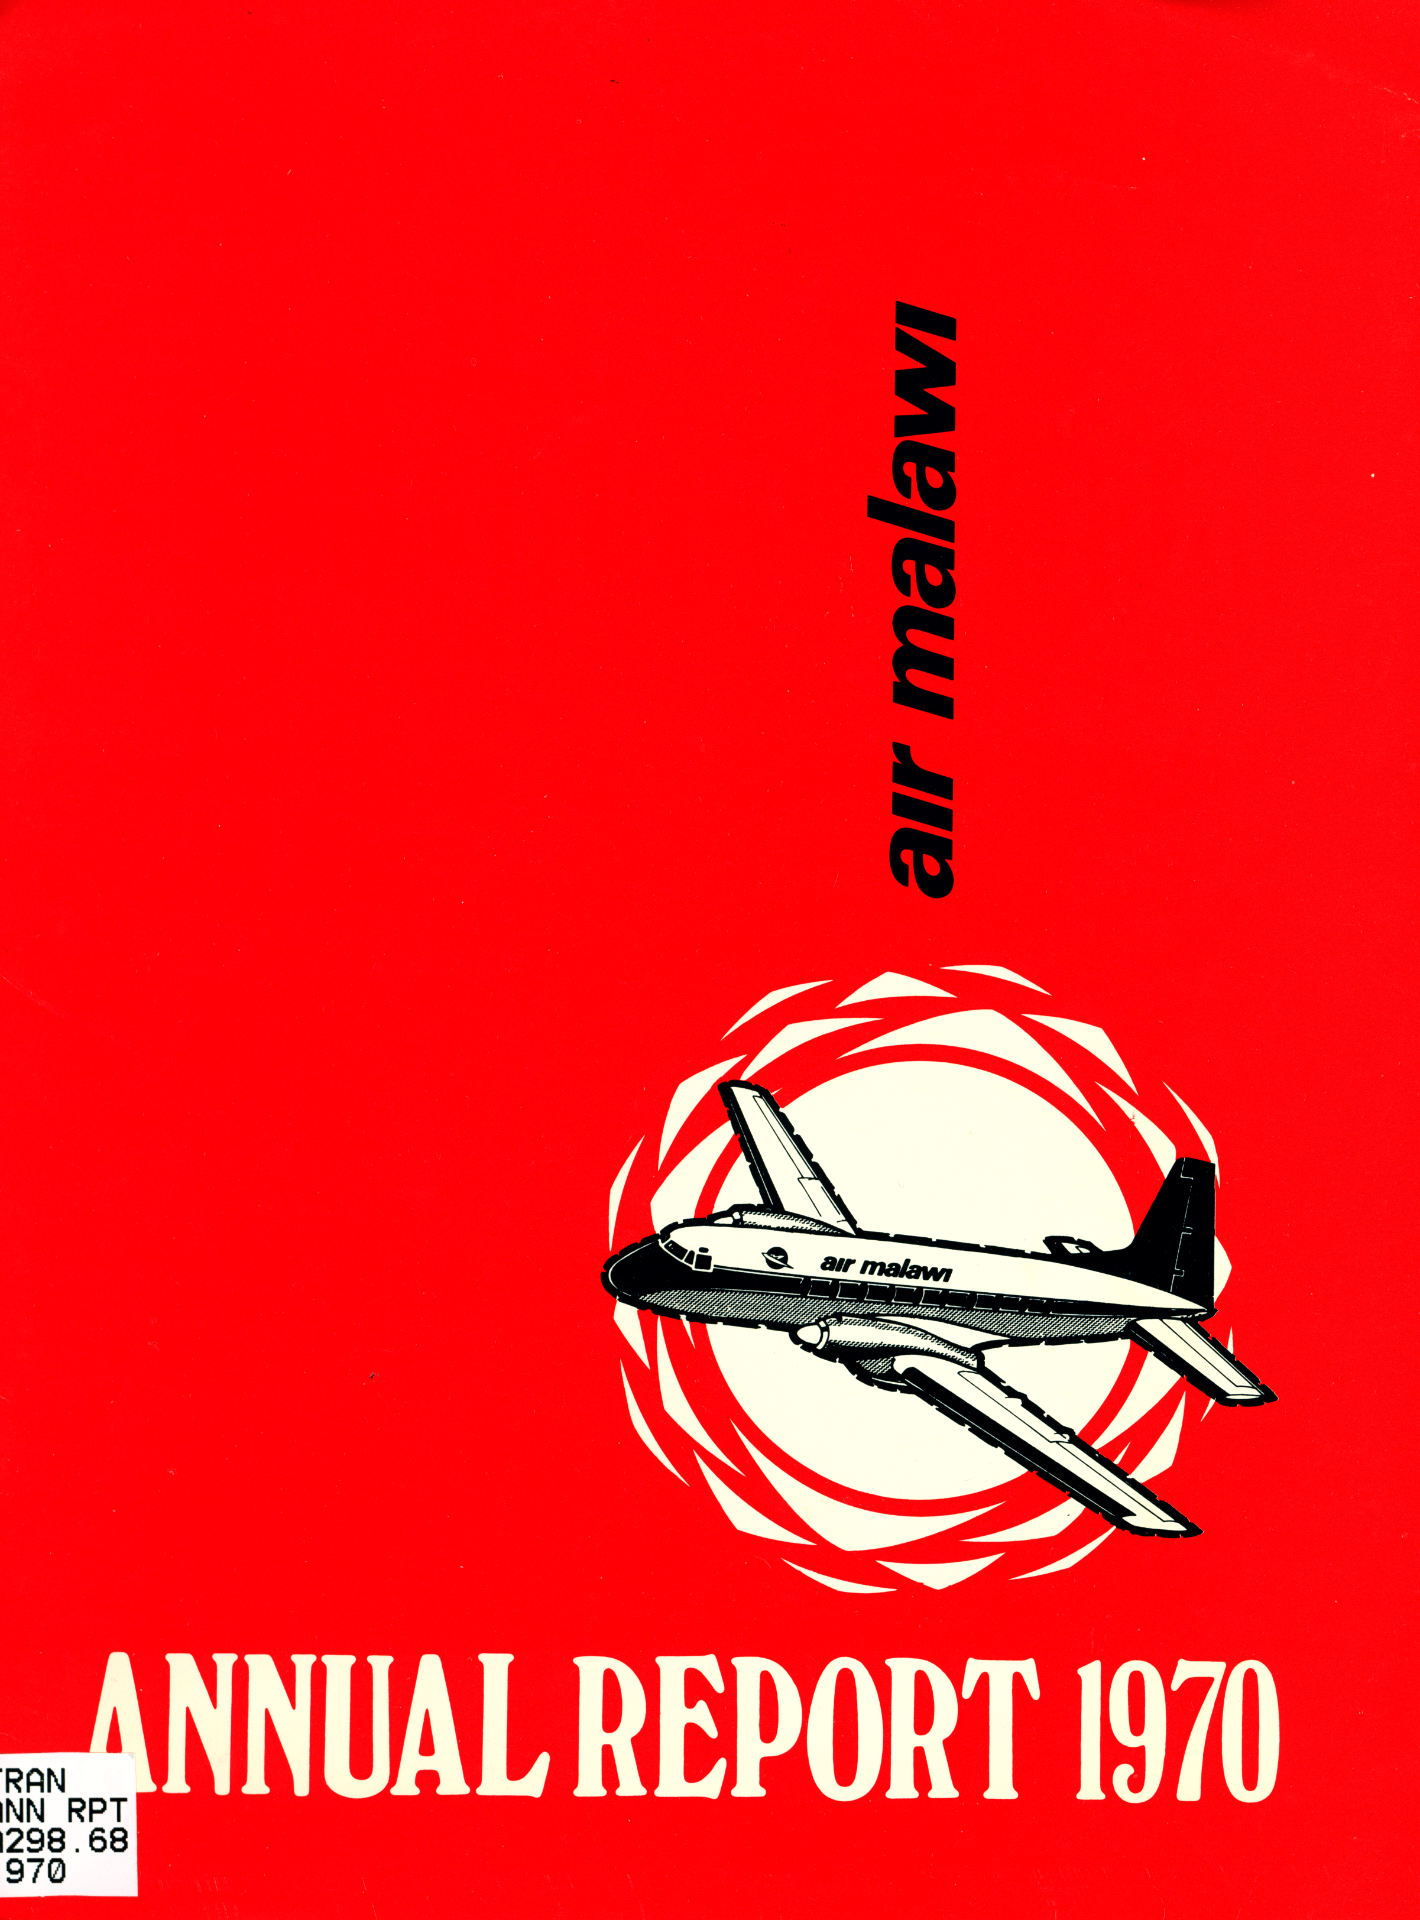 Front cover with plane in a circle